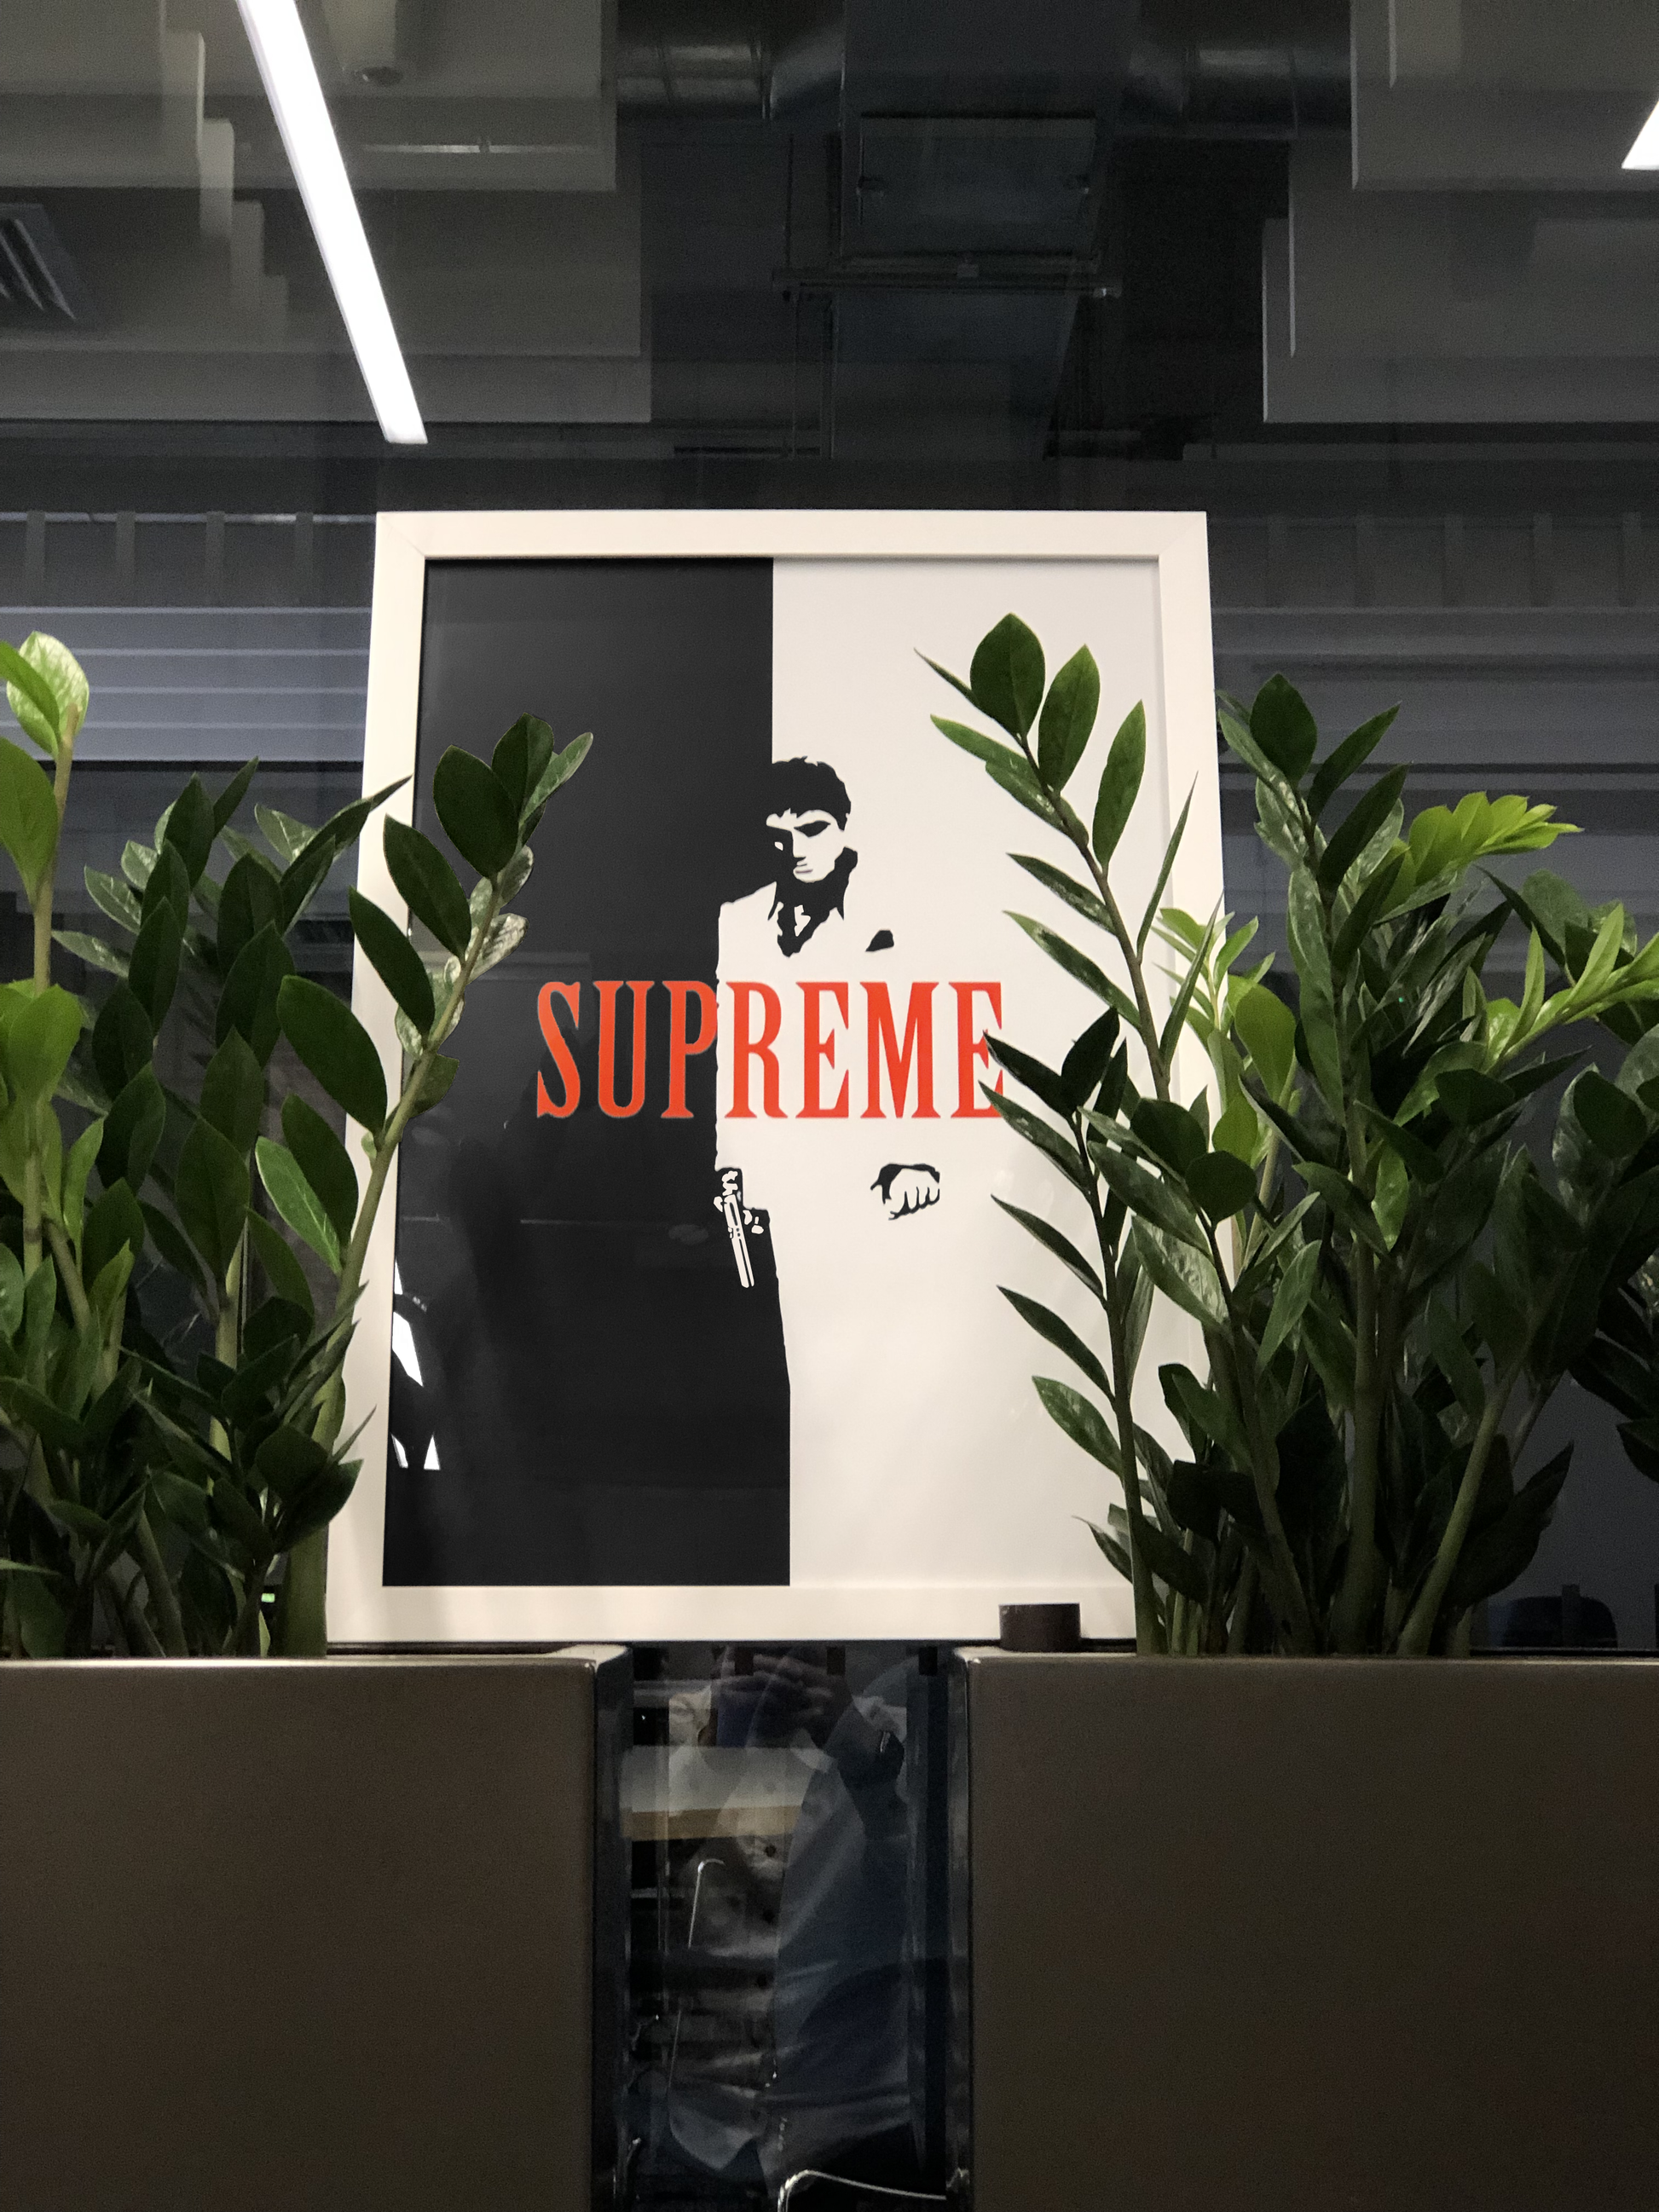 Premium & Sustainable Supreme Scarface Poster Print. Hand crafted in the UK from the highest quality paper, created with sustainable FSC paper. Texturised inks, brings the poster to life. Available to purchase with a Polcore Recycled Plastic Frame with Perspex screening to let your print do the talking. Global shipping